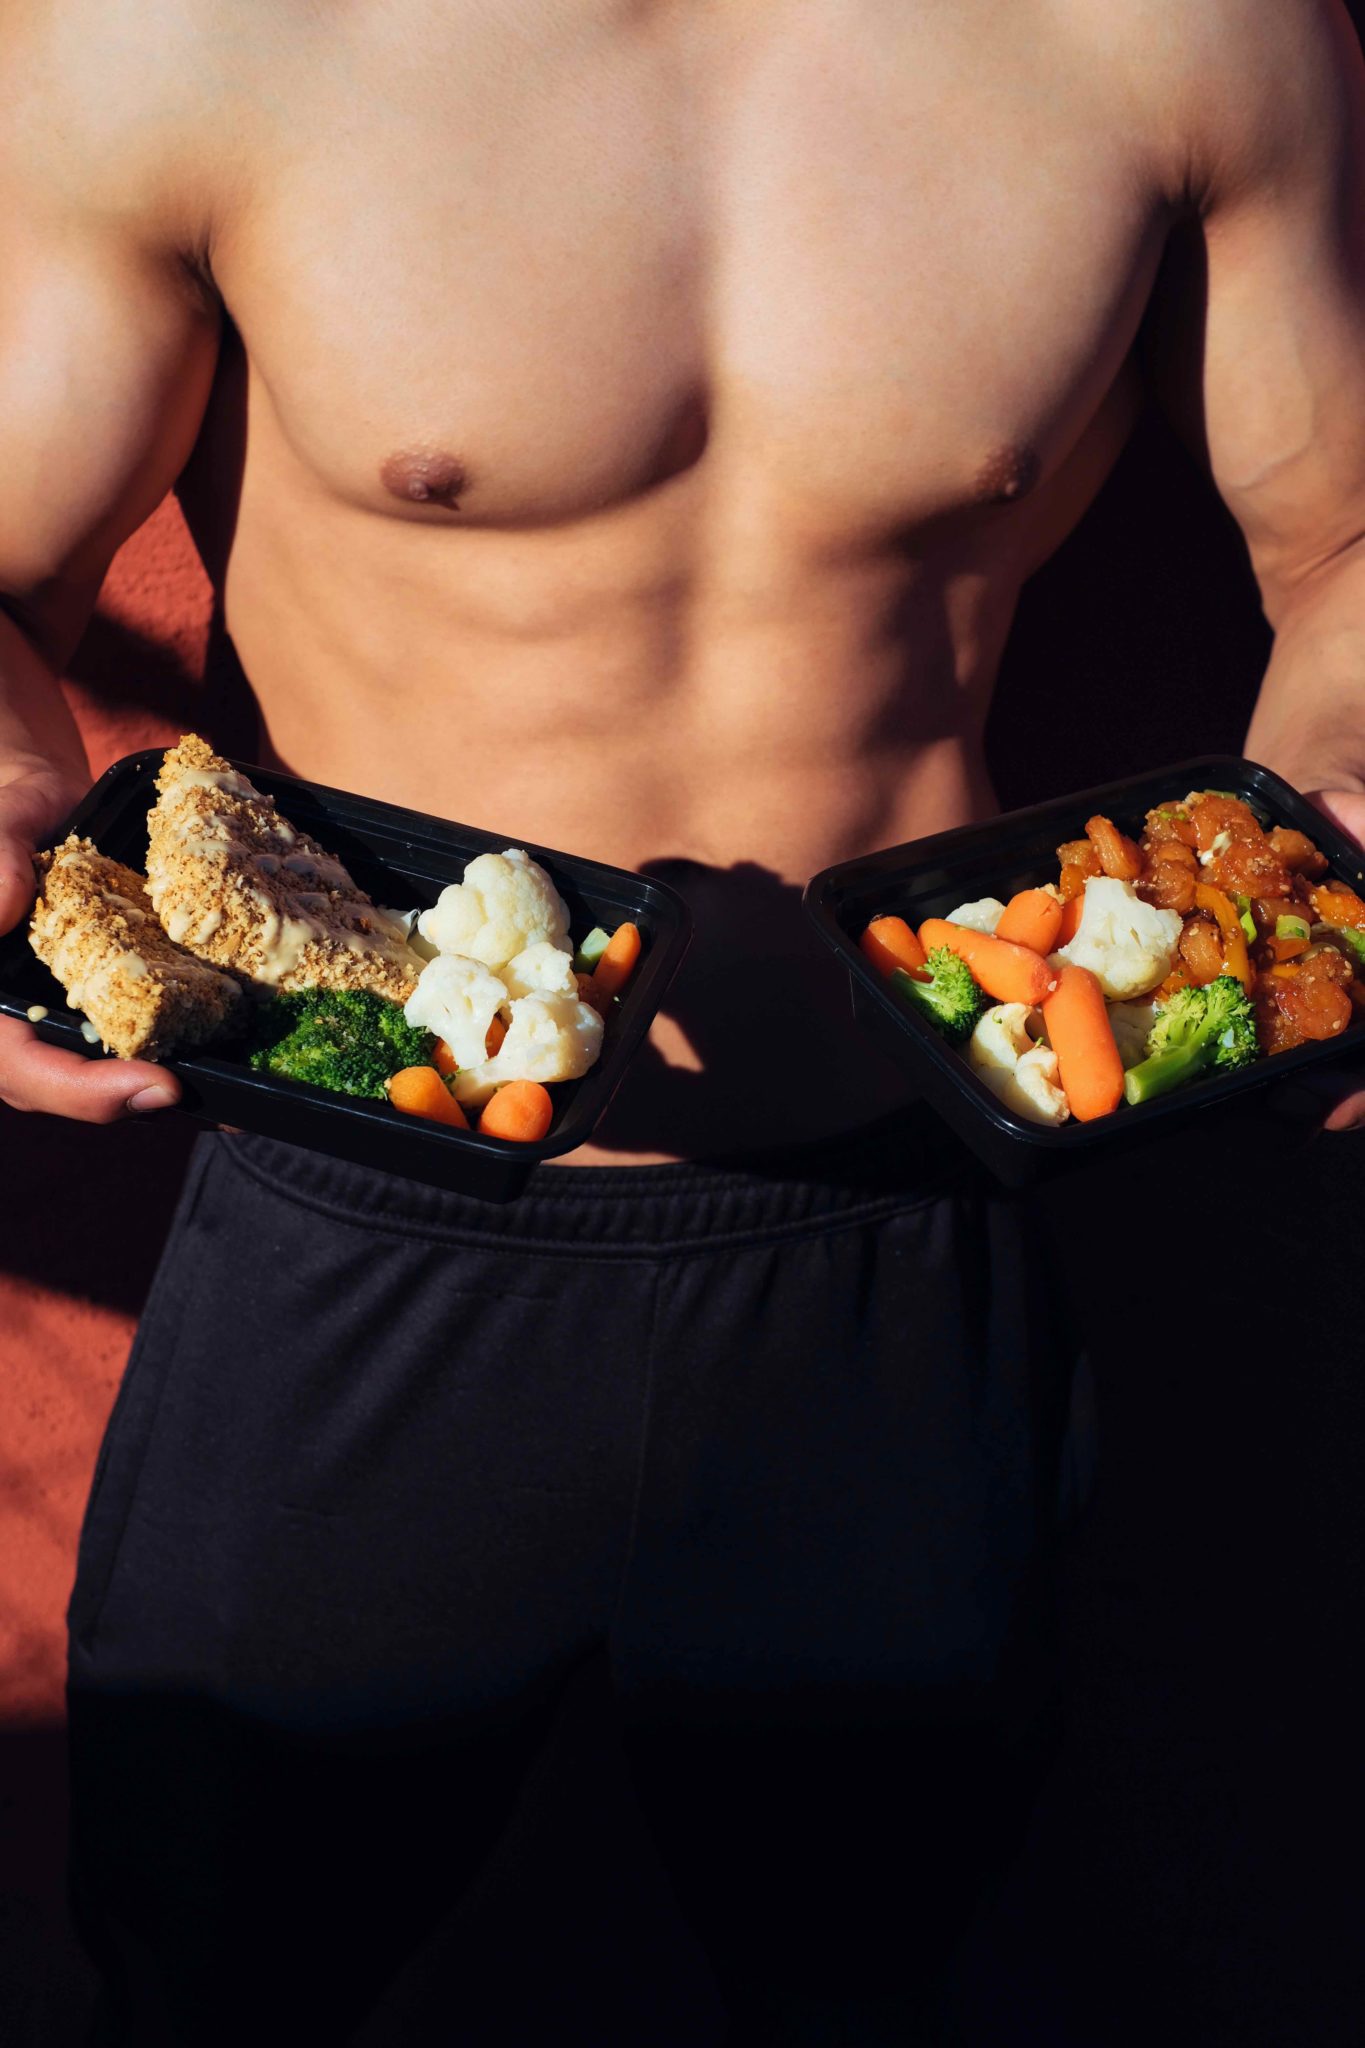 shirtless man with six pack abs holding plates of vegetables